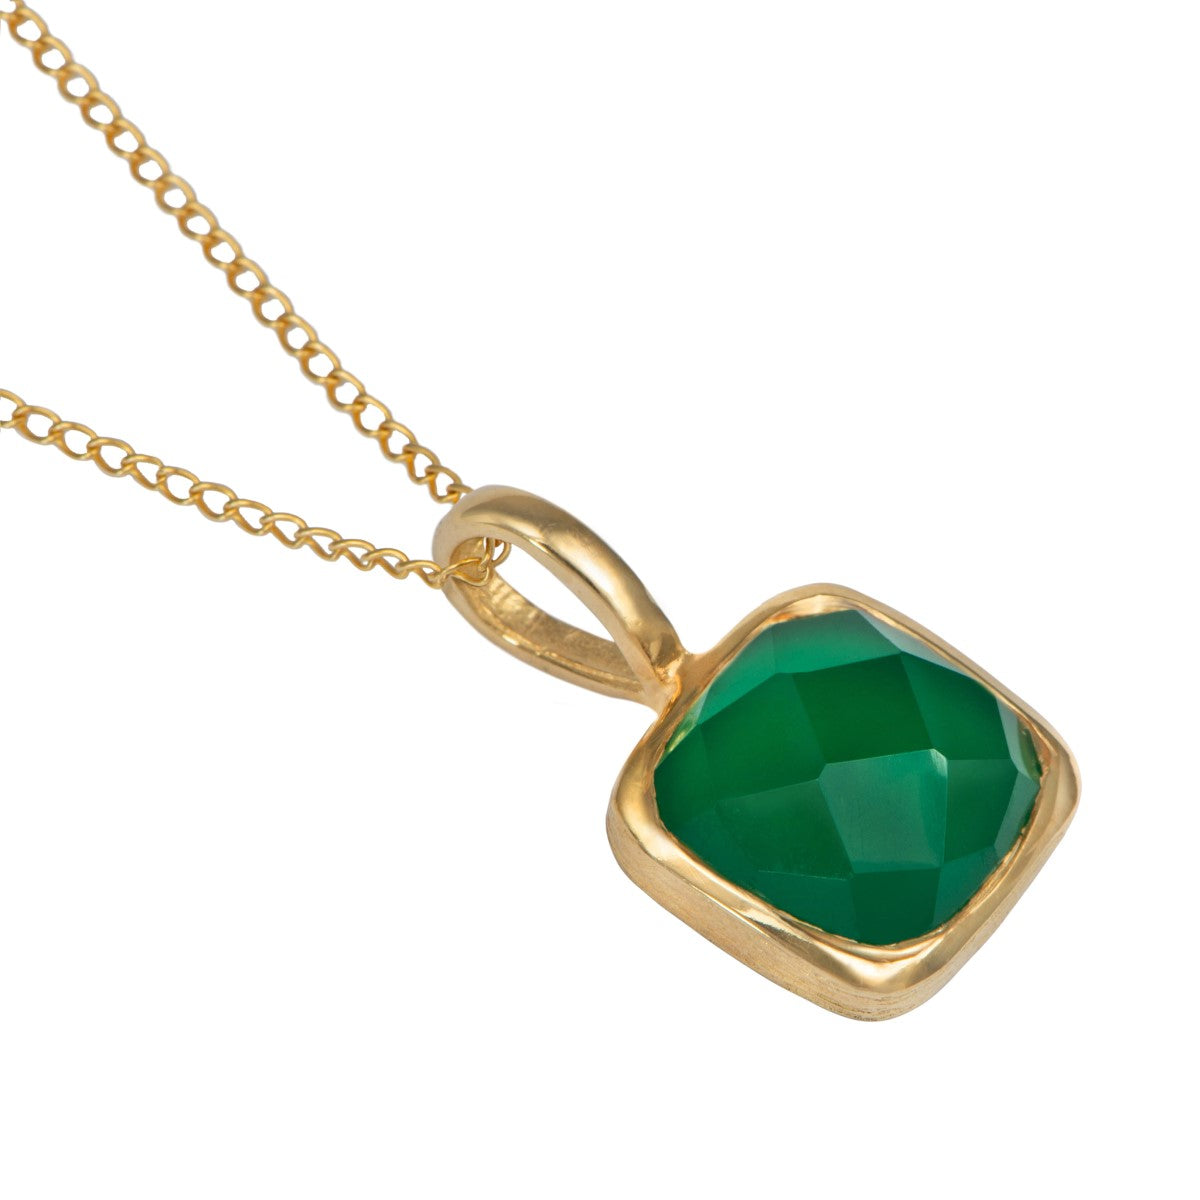 Gold Plated Sterling Silver Pendant Necklace with a Faceted Square Gemstone - Green Onyx